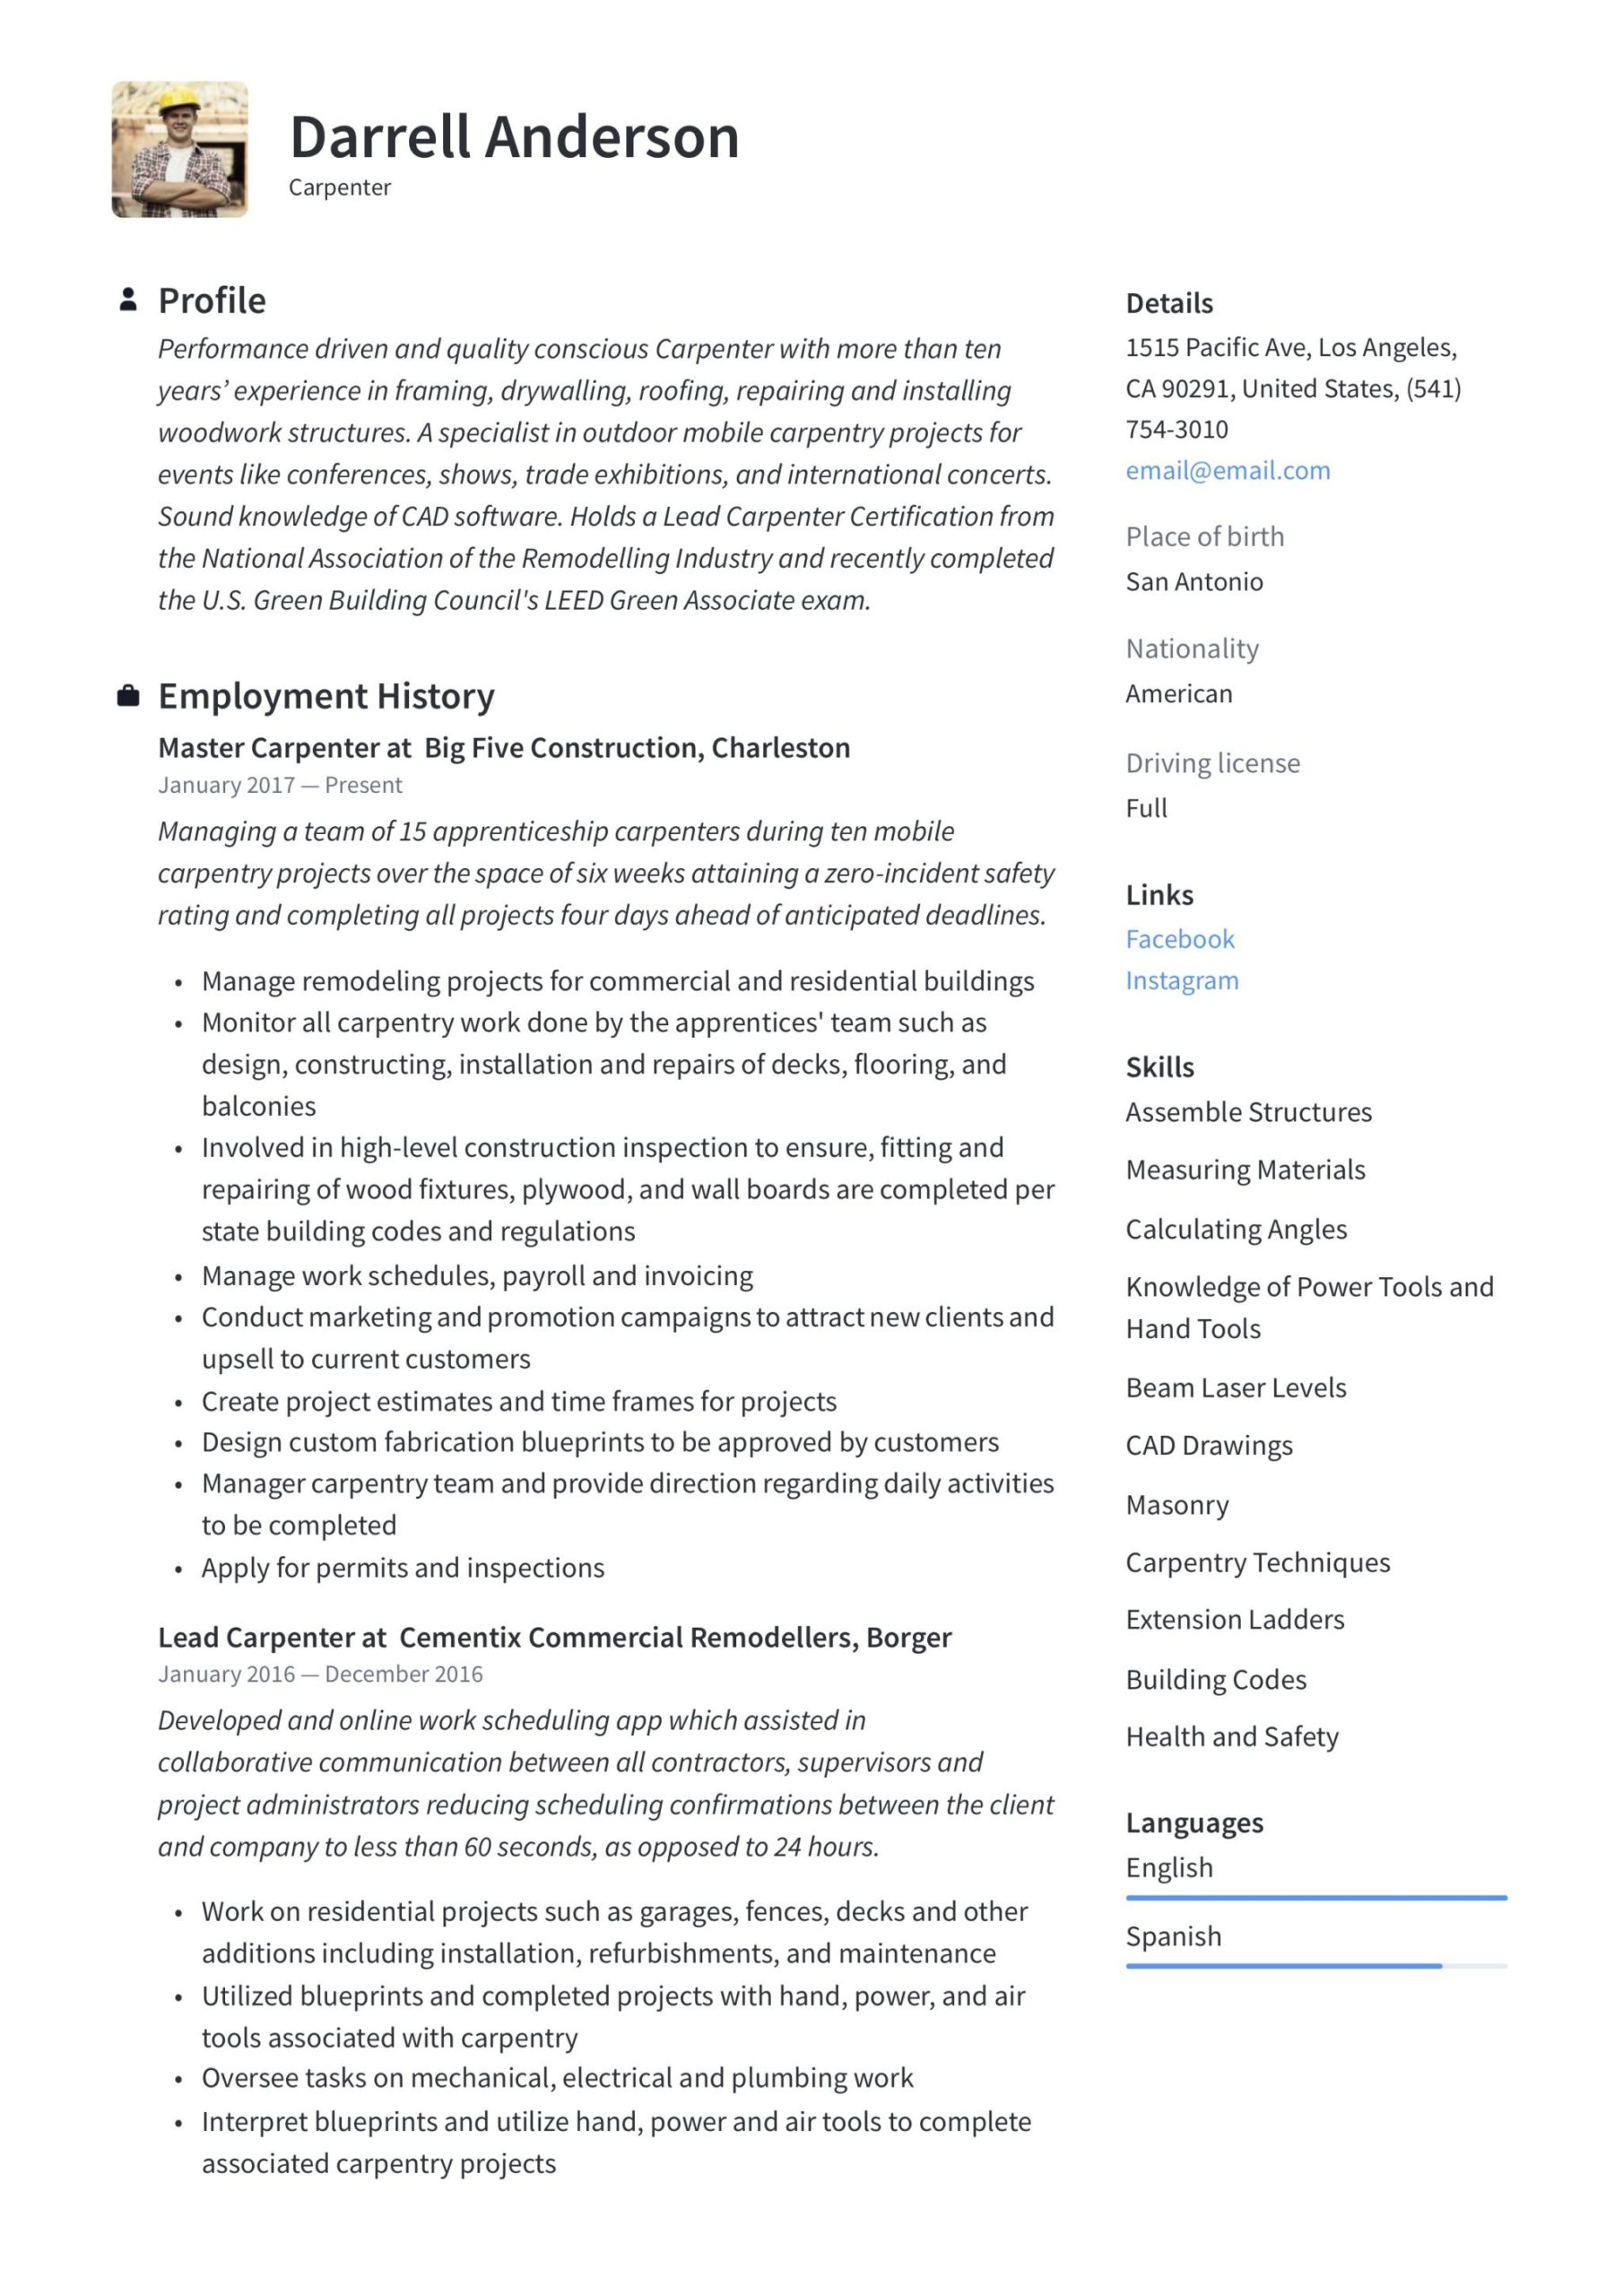 Windows and Doors Bussiness Owner Resume Sample Carpenter Resume & Writing Guide  12 Resume Examples 2022